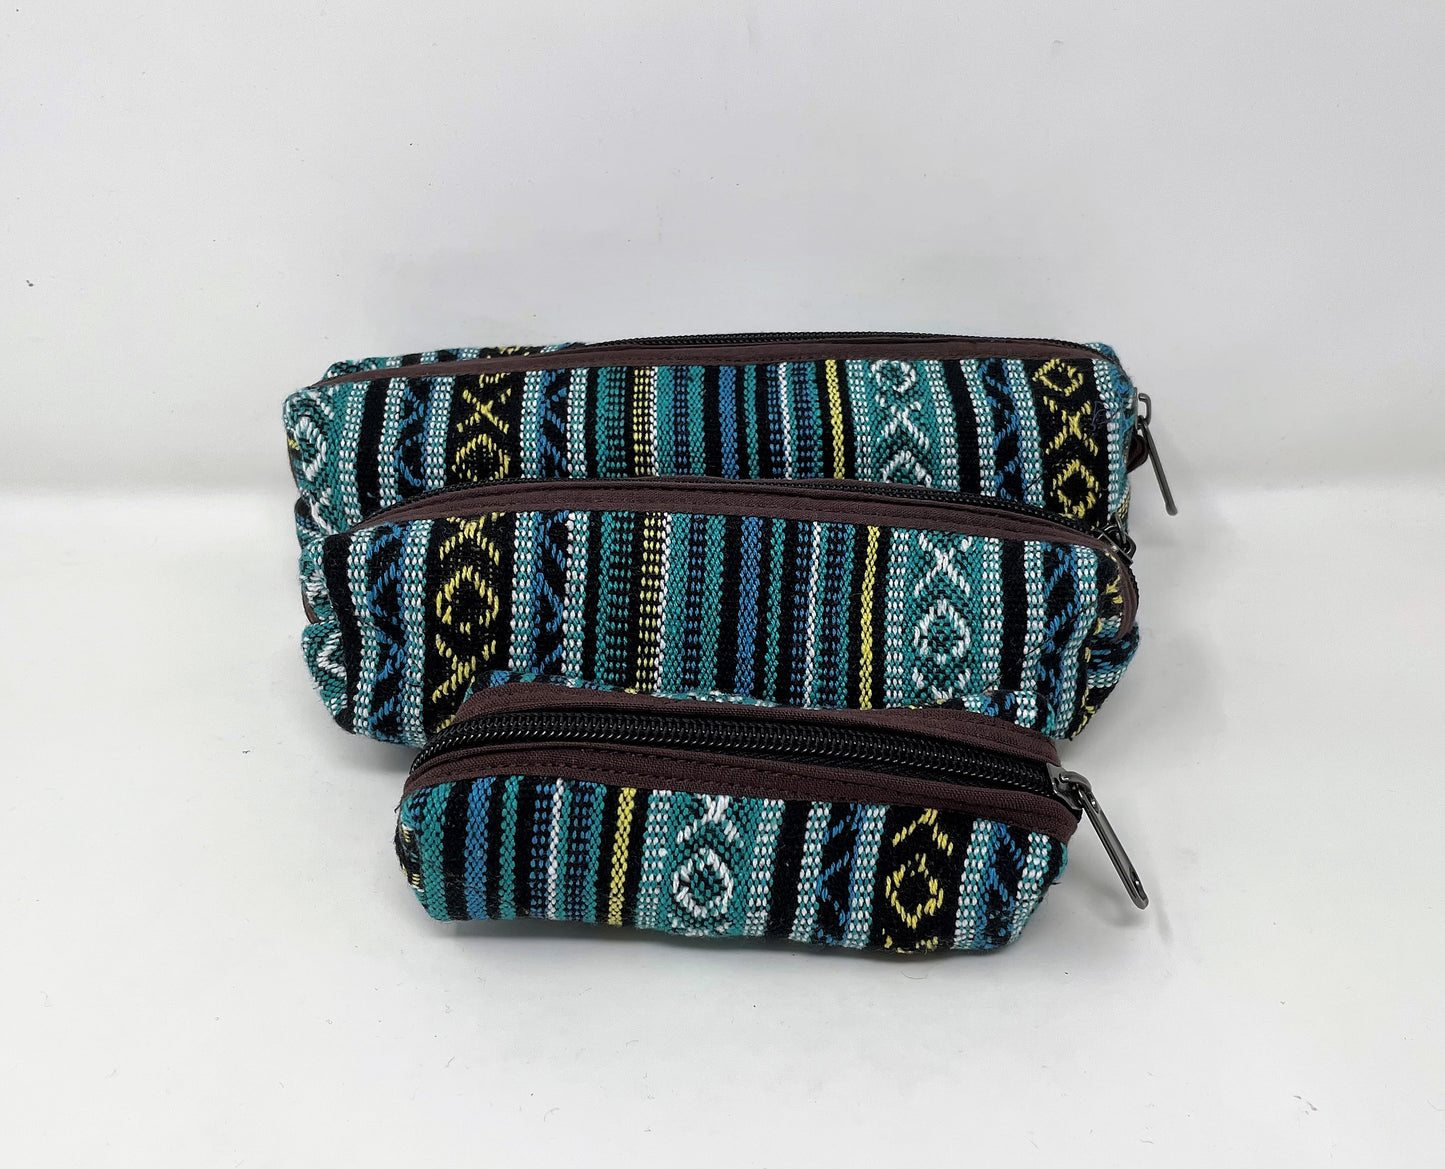 Himalayan Multicolor Hemp Bags 3 Nestle Pouches w/Zippers